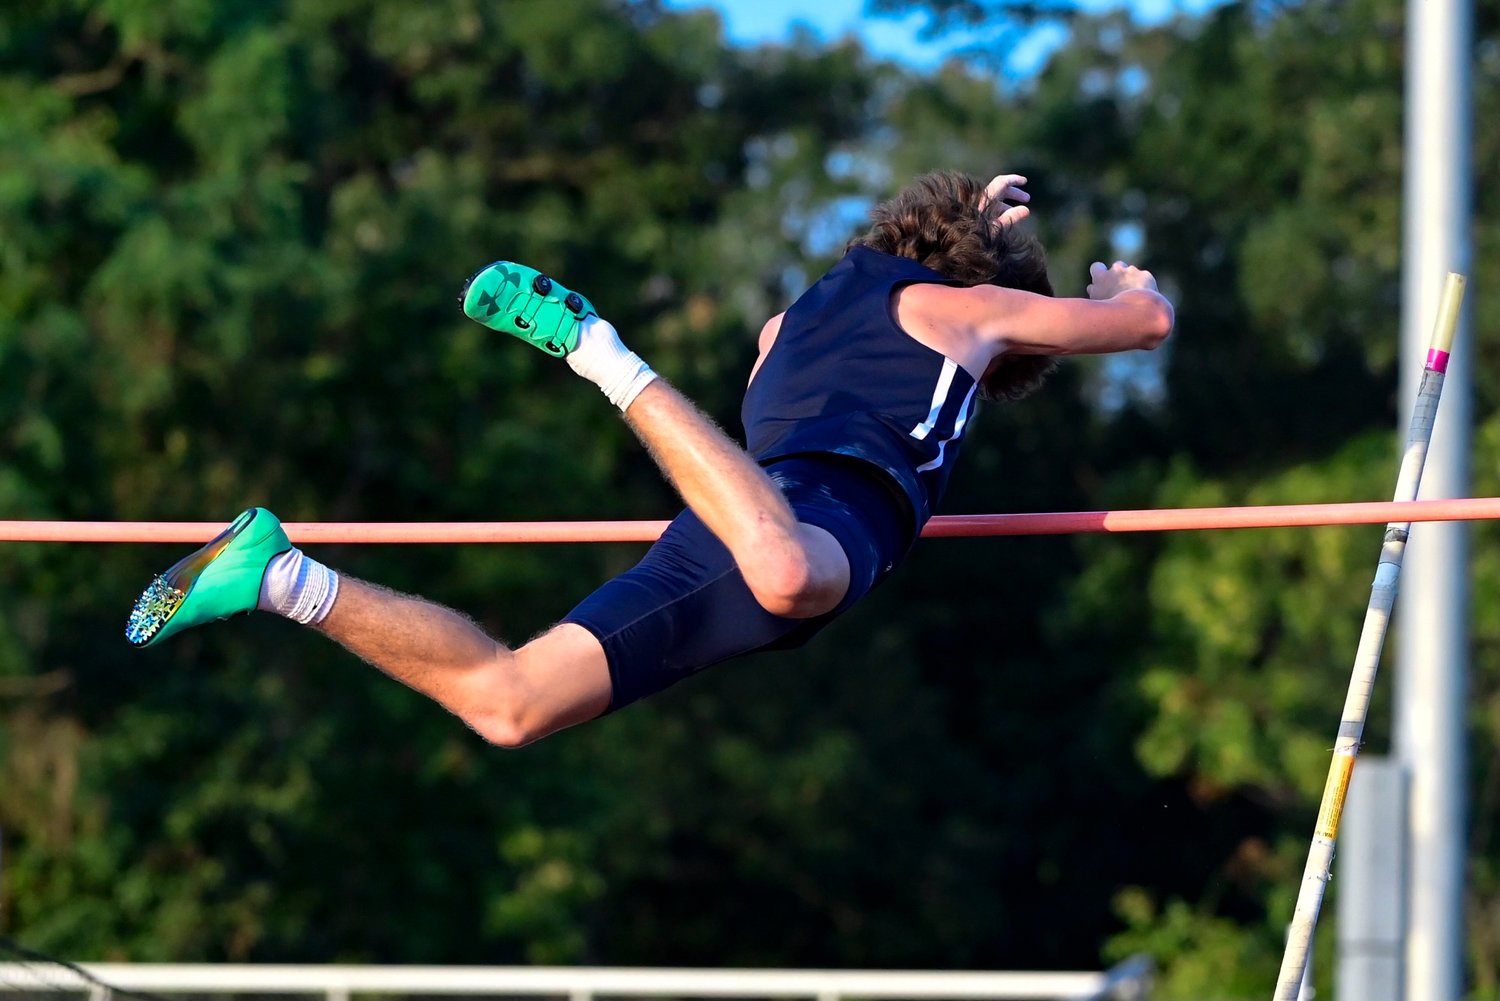 Junior Ryan Laughlin (pictured during the regional finals) came in second for pole vault during the state championships, clearing 11 feet, 6 inches.